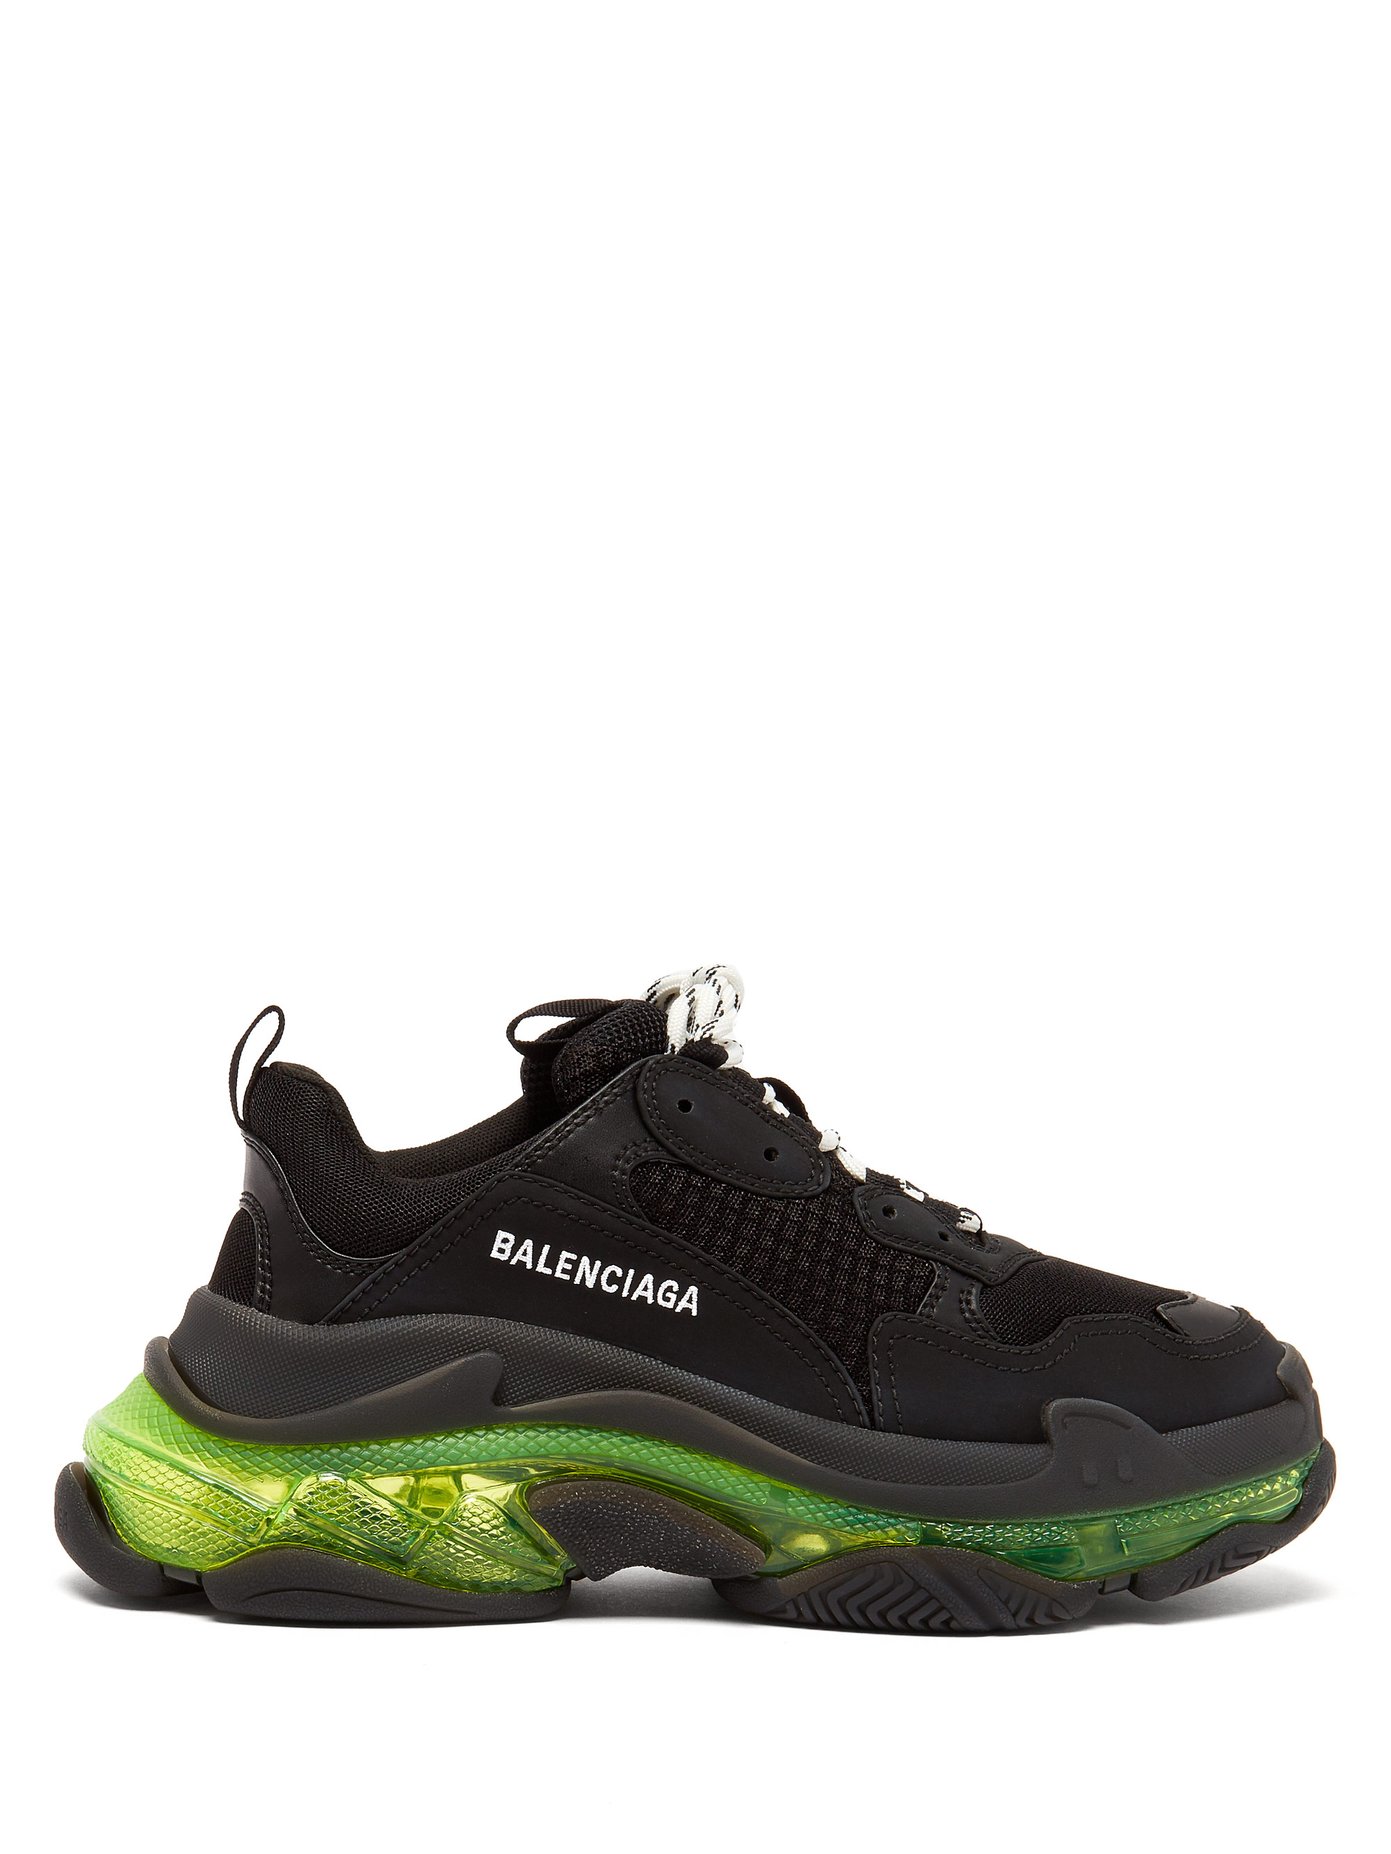 Review the NEW Balenciaga Track 3 0 LED Sneakers Triple